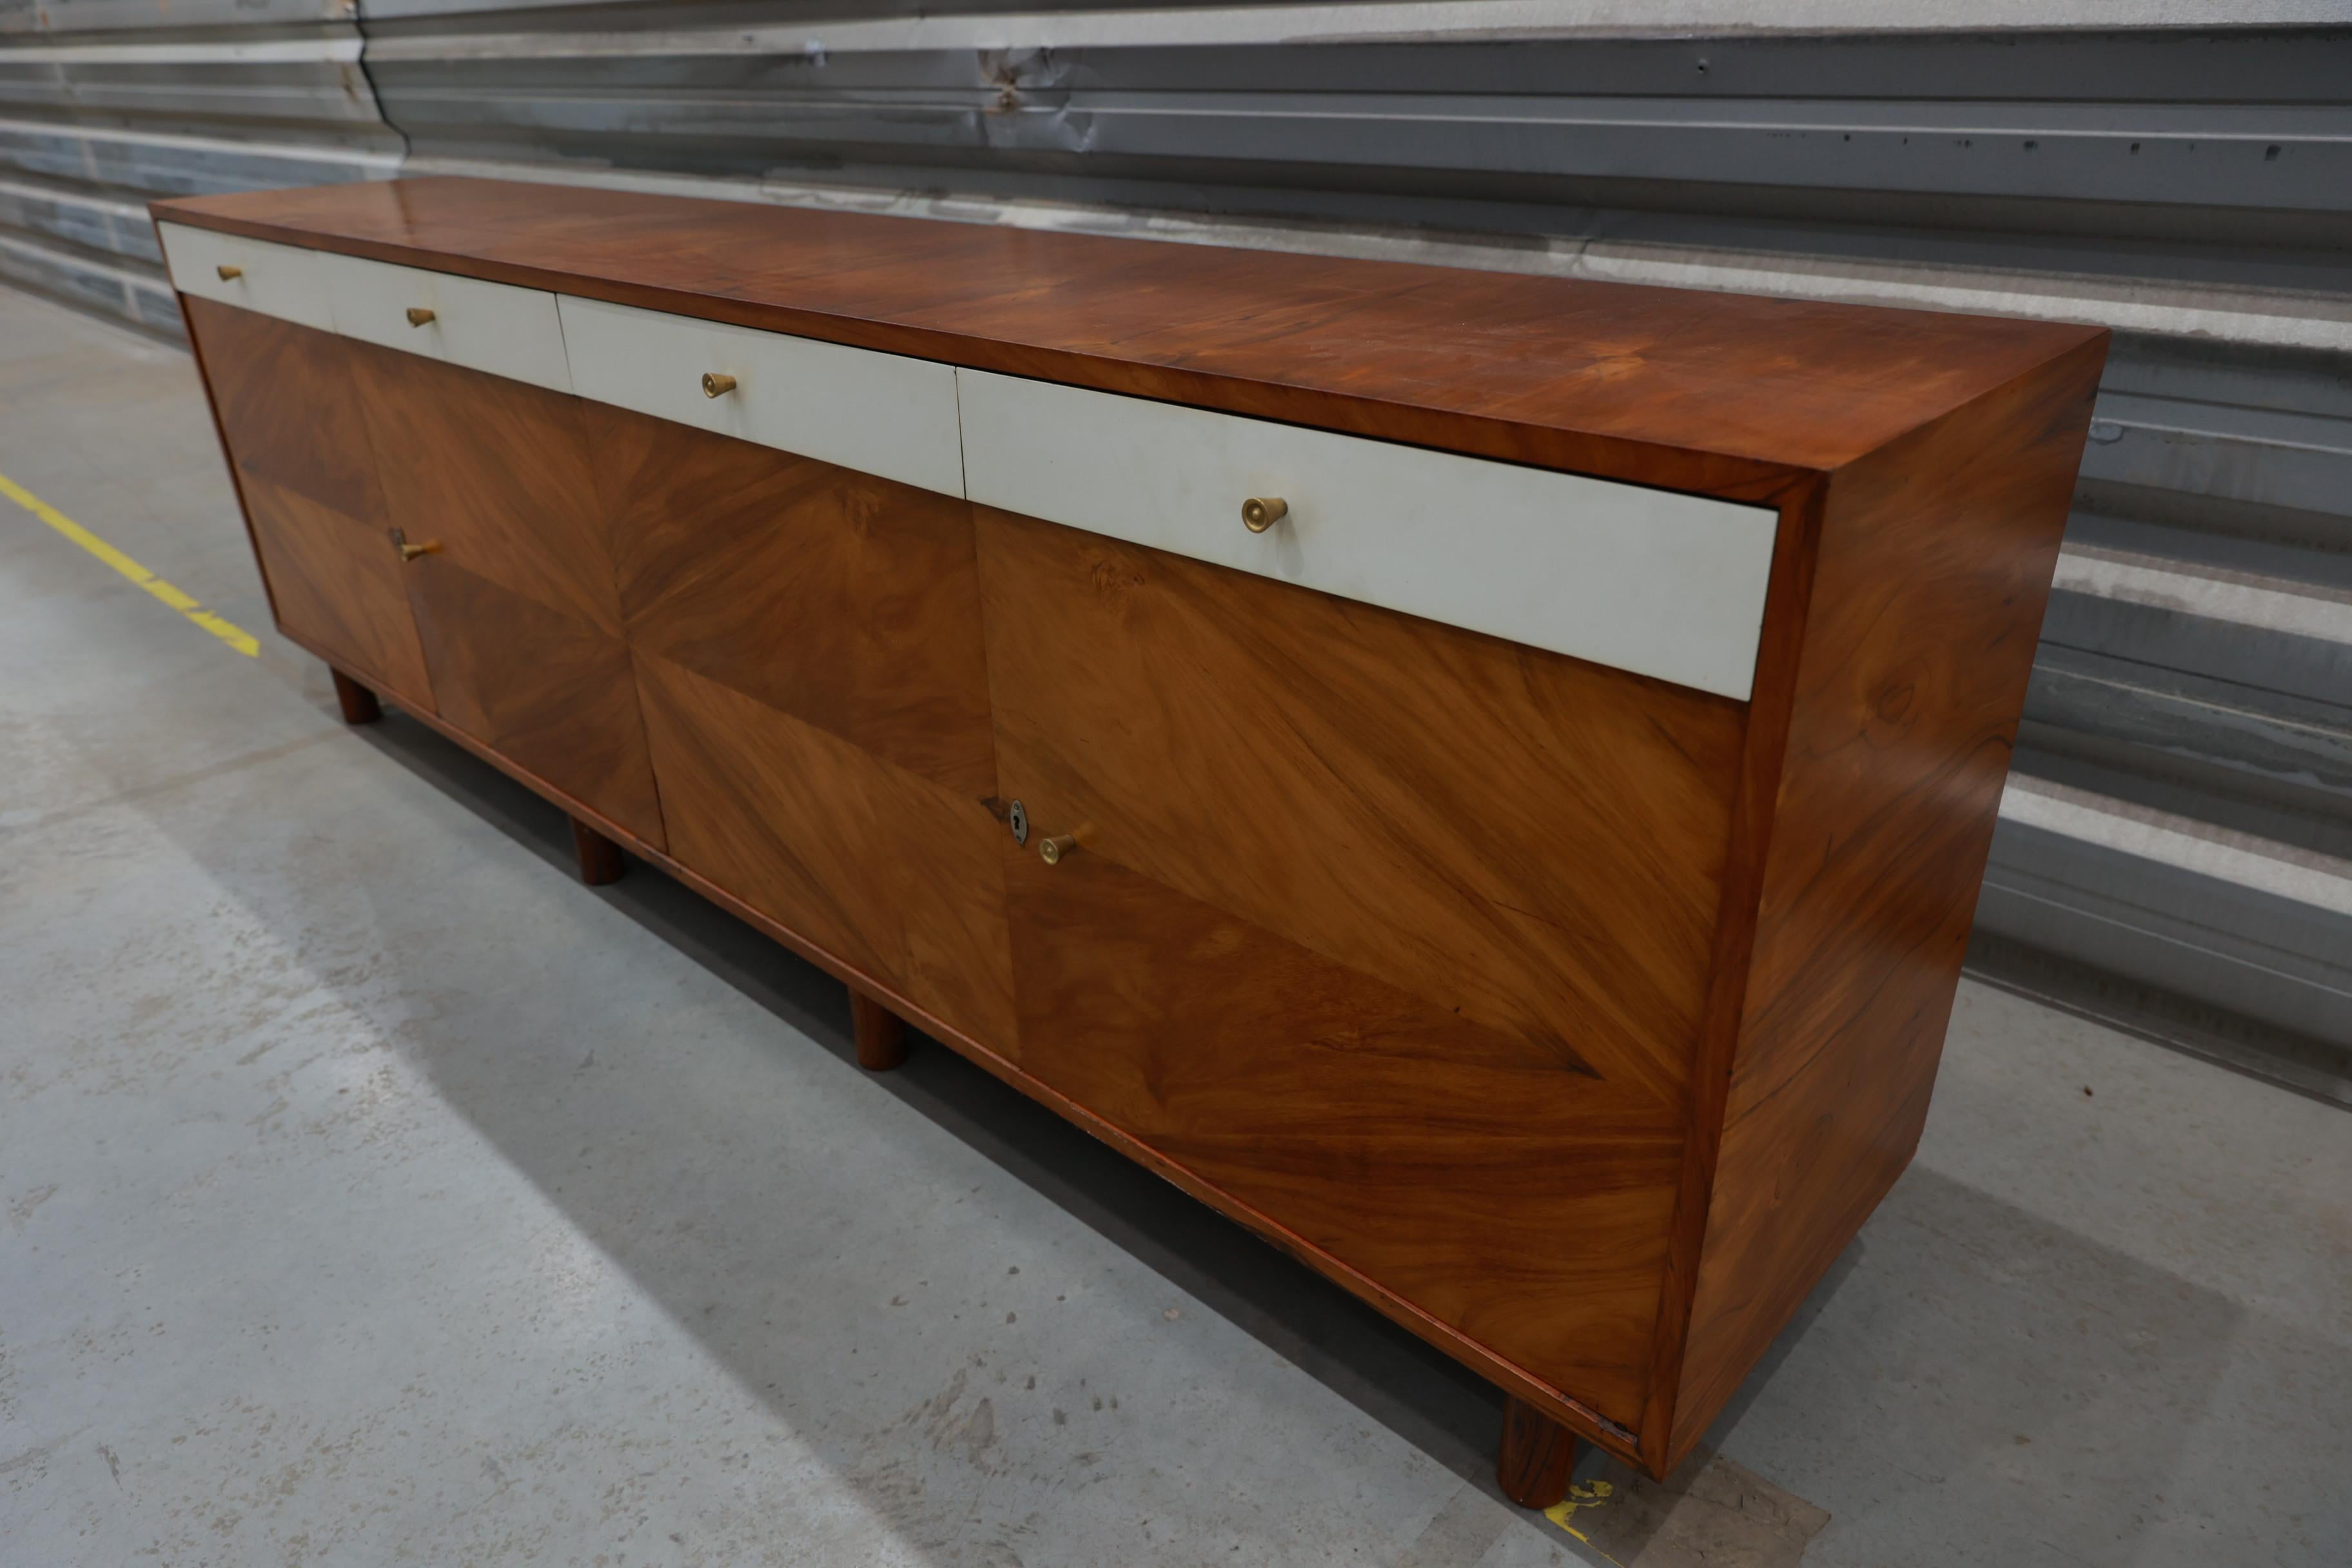 Brazilian Credenza in Hardwood and Brass, Ernesto Hauner for Mobilinea, c. 1960s For Sale